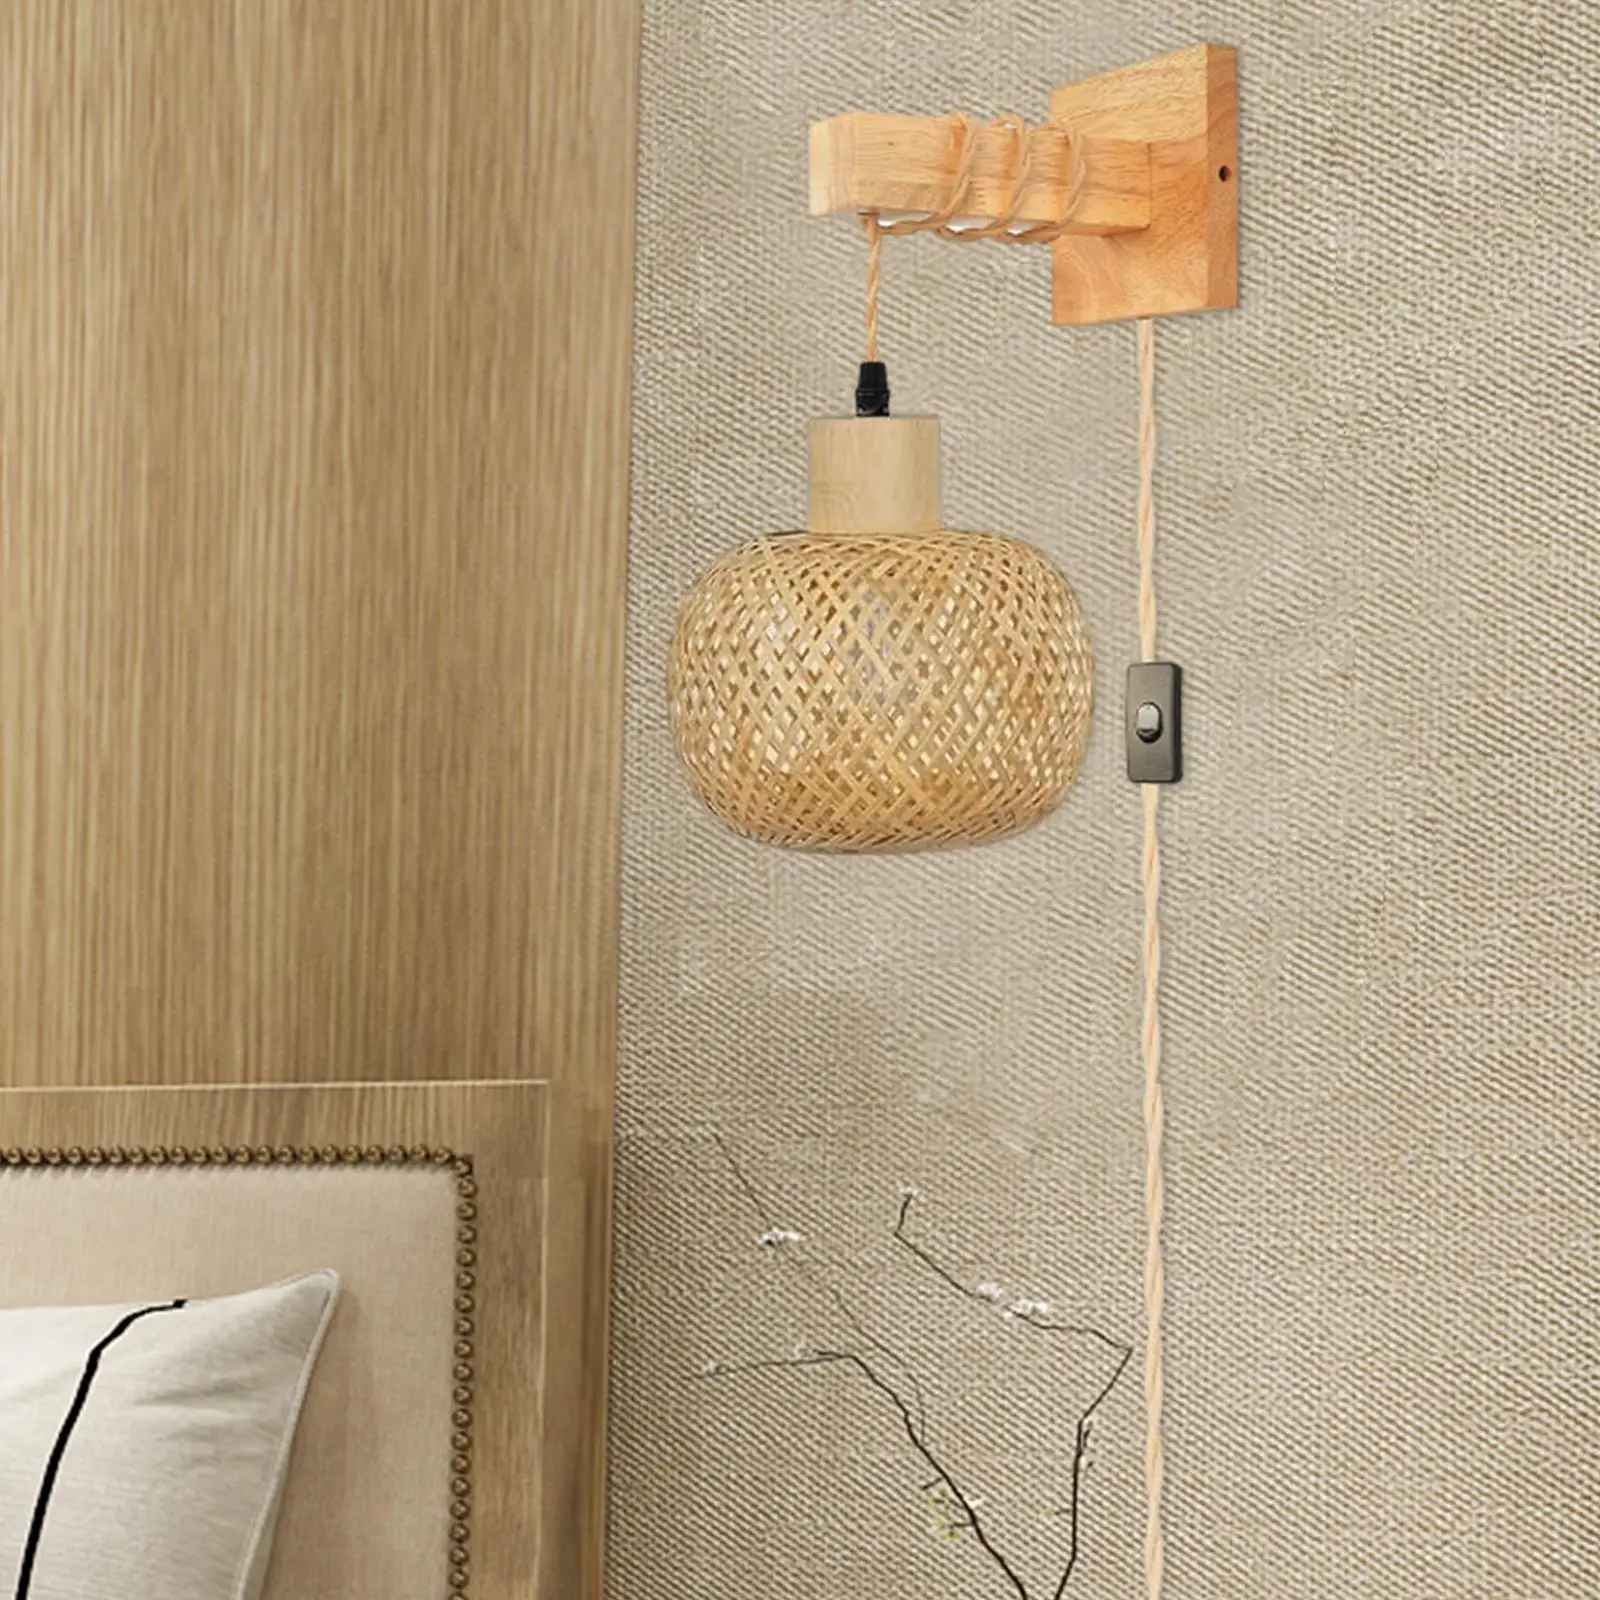 Wall Sconce Decorative Wall Mount Sconce Plug in Pendant Light Bamboo Bedside Wall Lamp for Home Kitchen Hallway Bedroom Reading